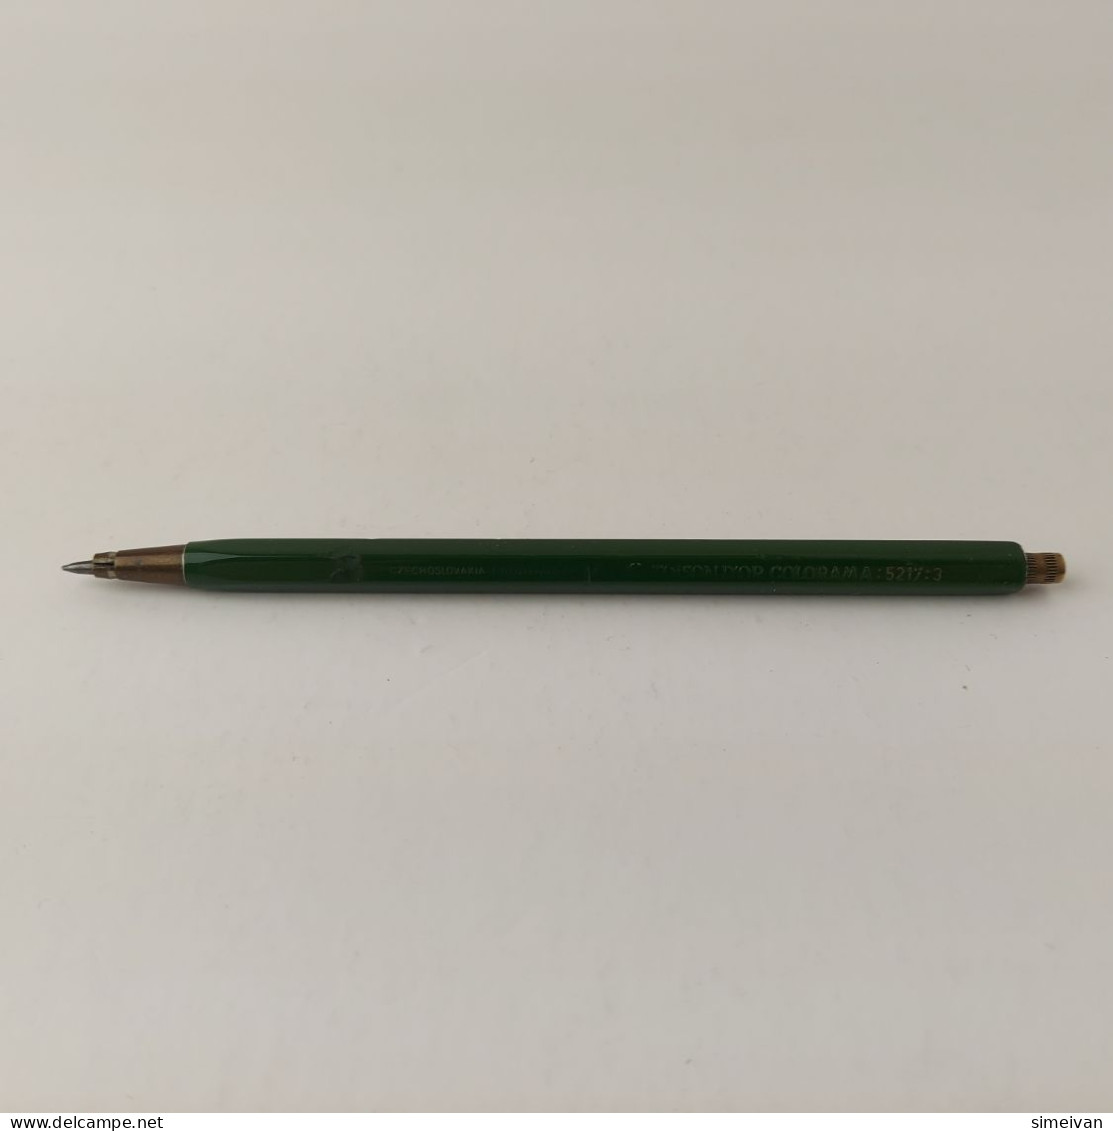 Vintage Mechanical Pencil TOISON D'OR COLORAMA 5217:3 Bohemia Works Green #5492 - Pens